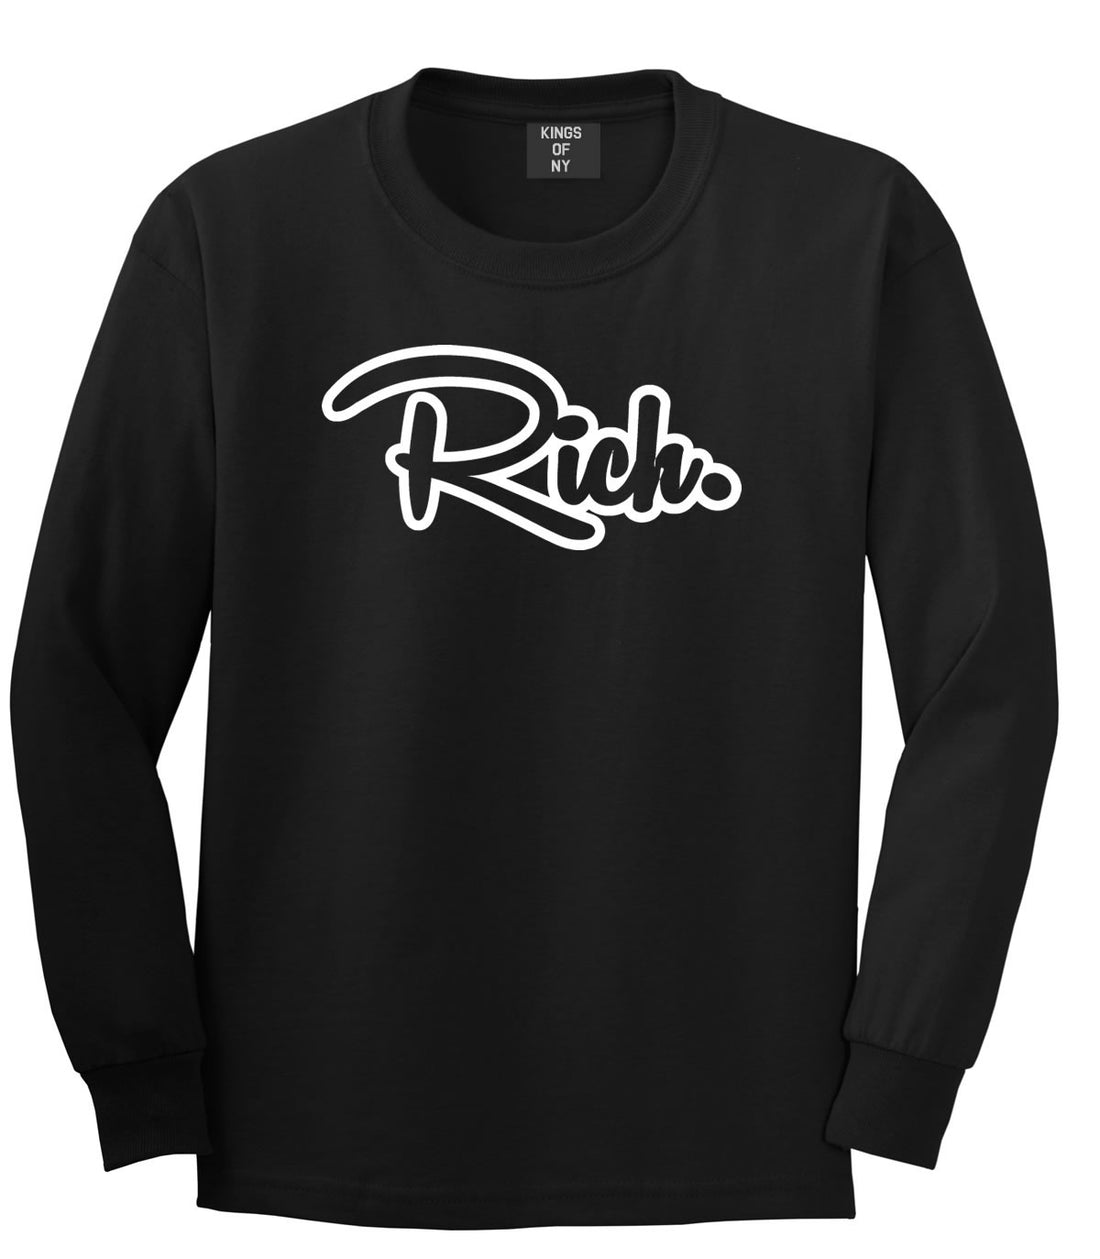 Rich Money Fab Style New York Richie NYC Long Sleeve Boys Kids T-Shirt In Black by Kings Of NY